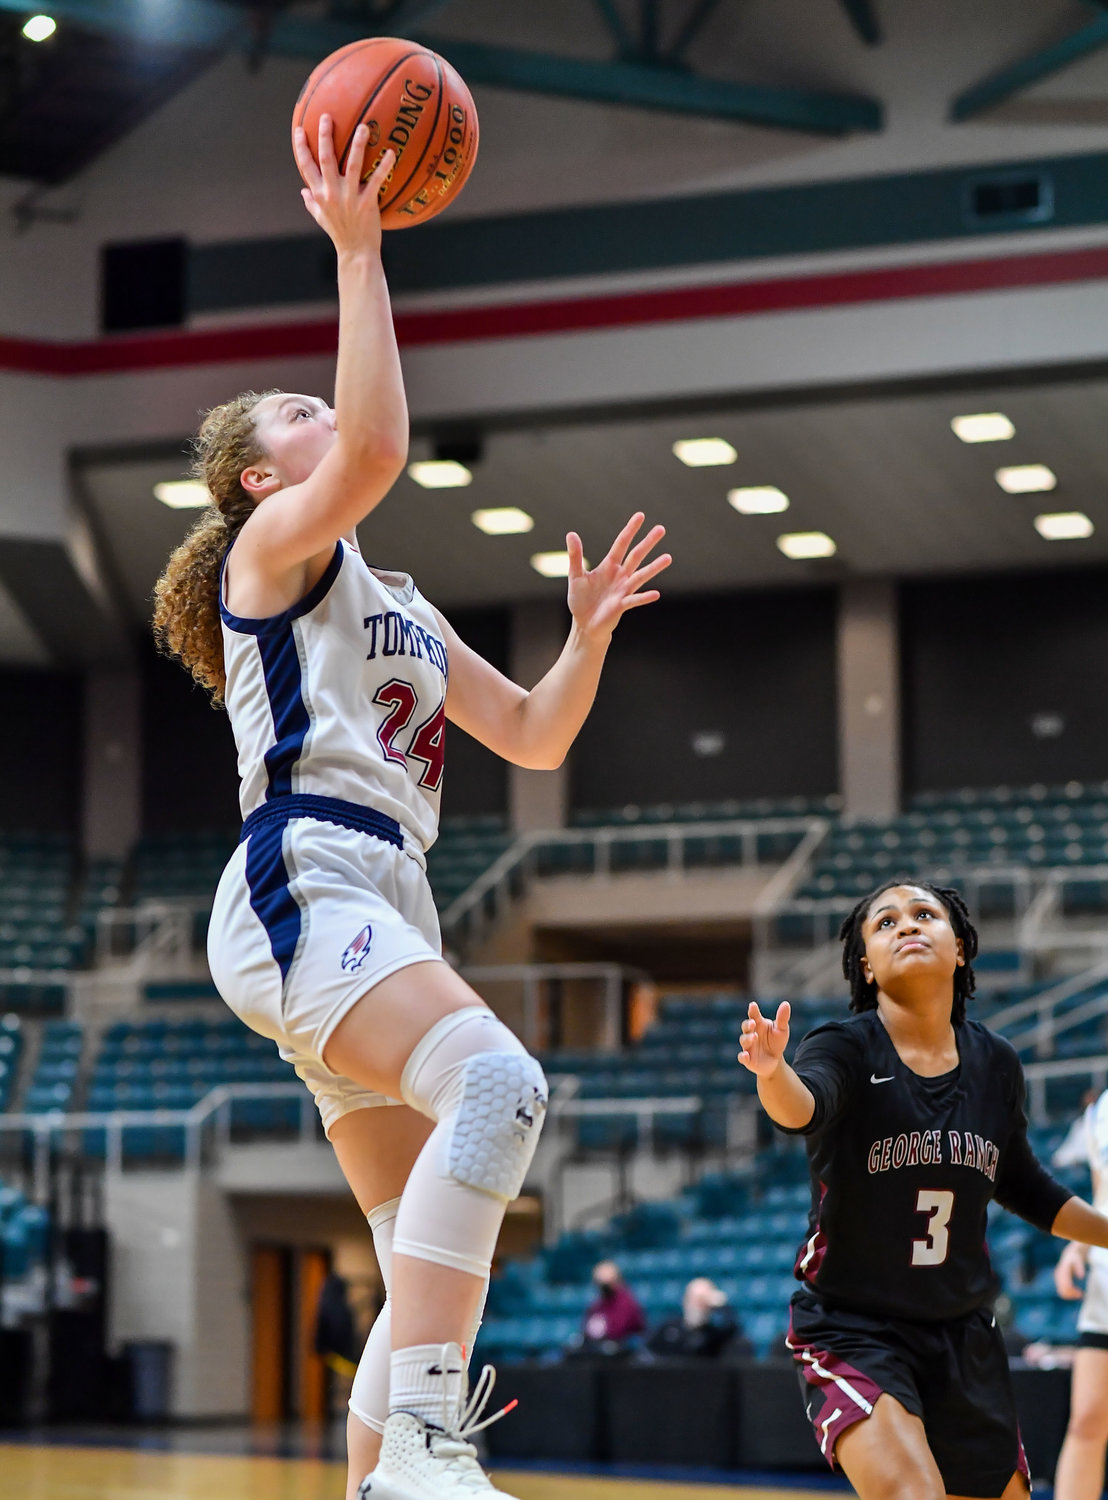 Katy Tx. Feb 15, 2022:  Tompkins Gabby Panter #24 drives to the basket during the Bi-District playoff, Tompkins vs George Ranch. (Photo by Mark Goodman / Katy Times)